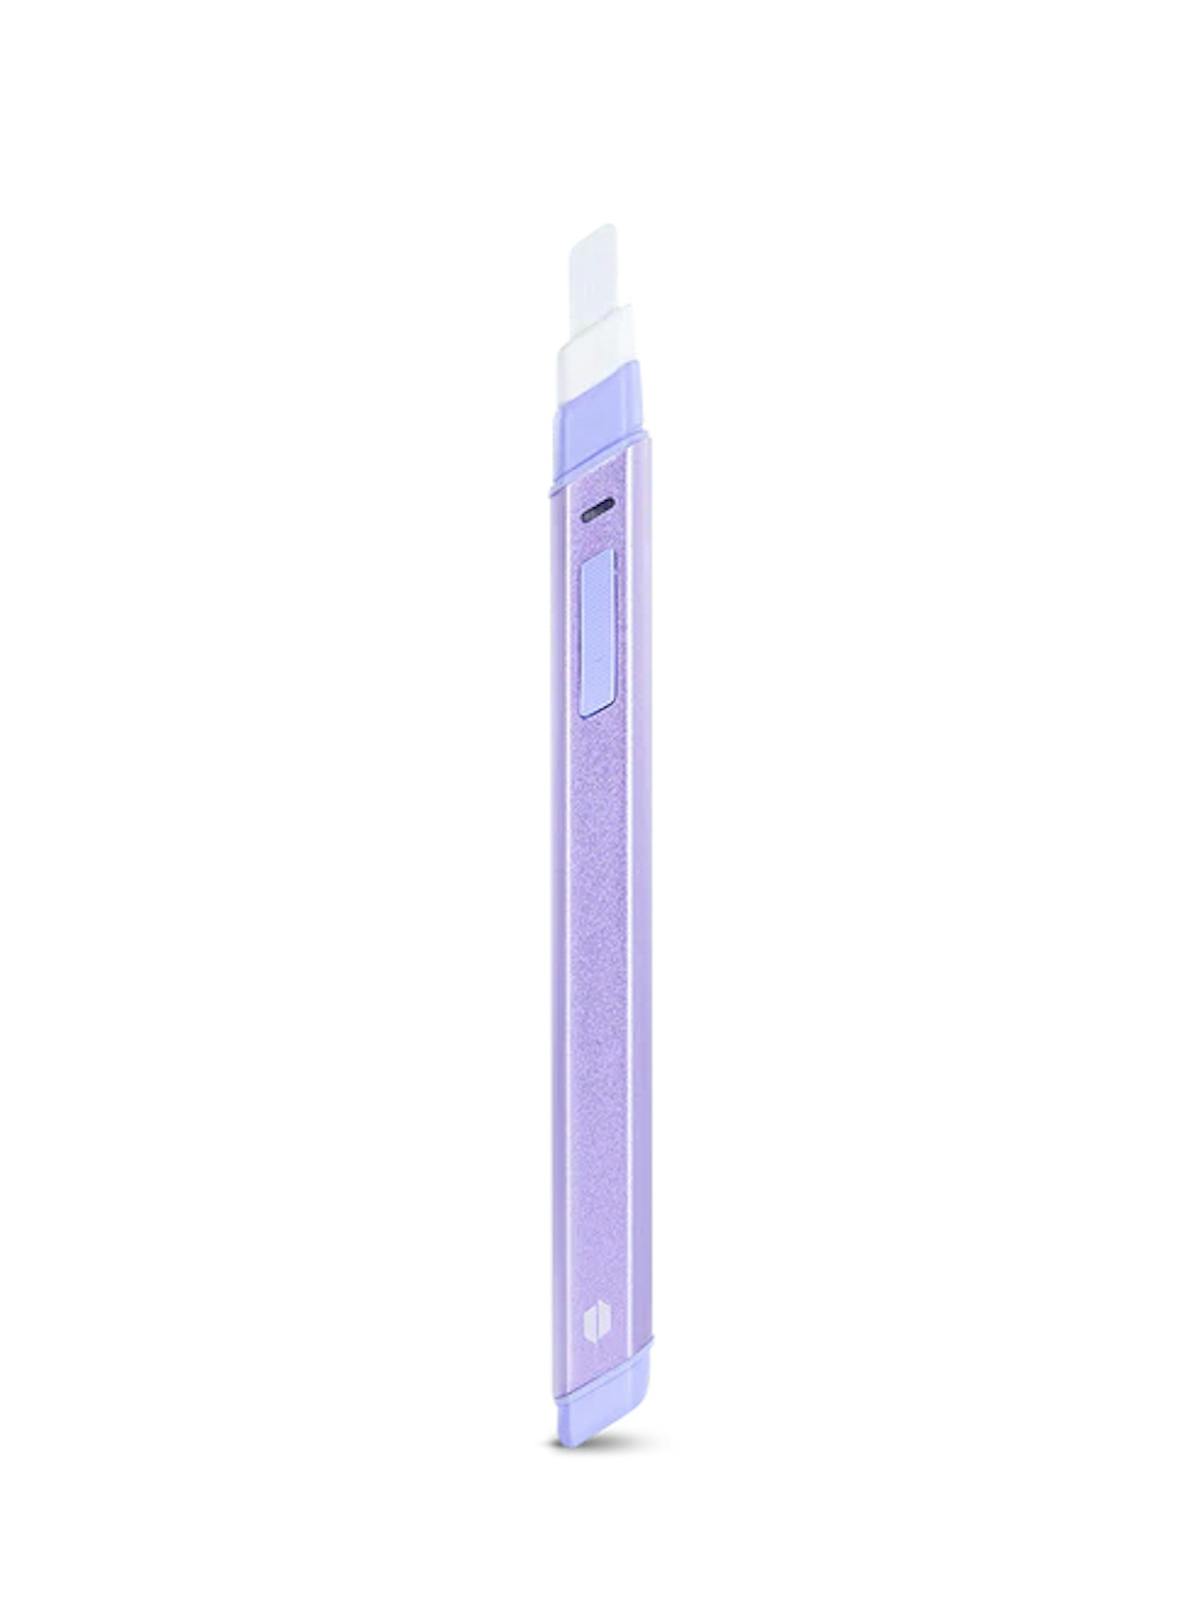 image of The Puffco Hot Knife - Lavender